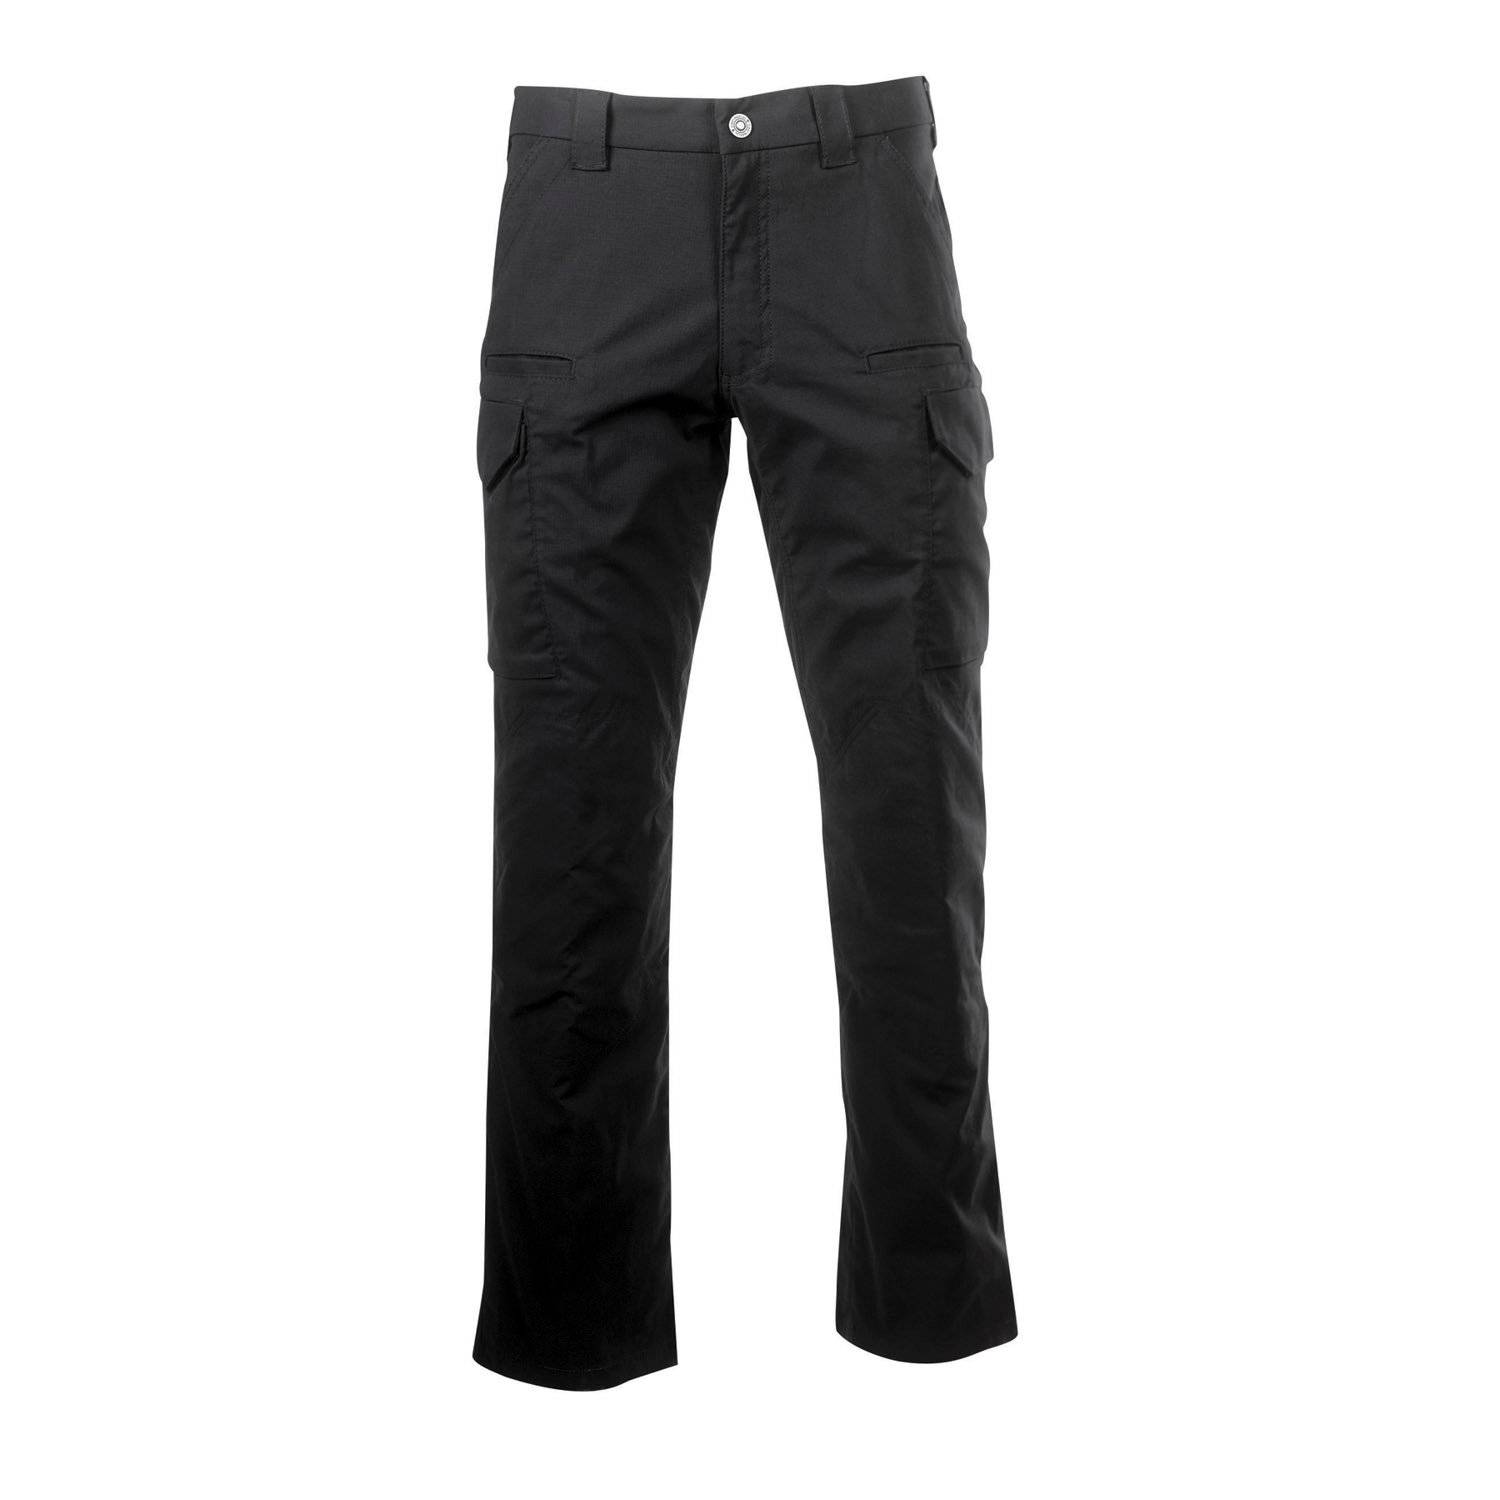 FIRST TACTICAL WOMEN'S V2 TACTICAL PANTS